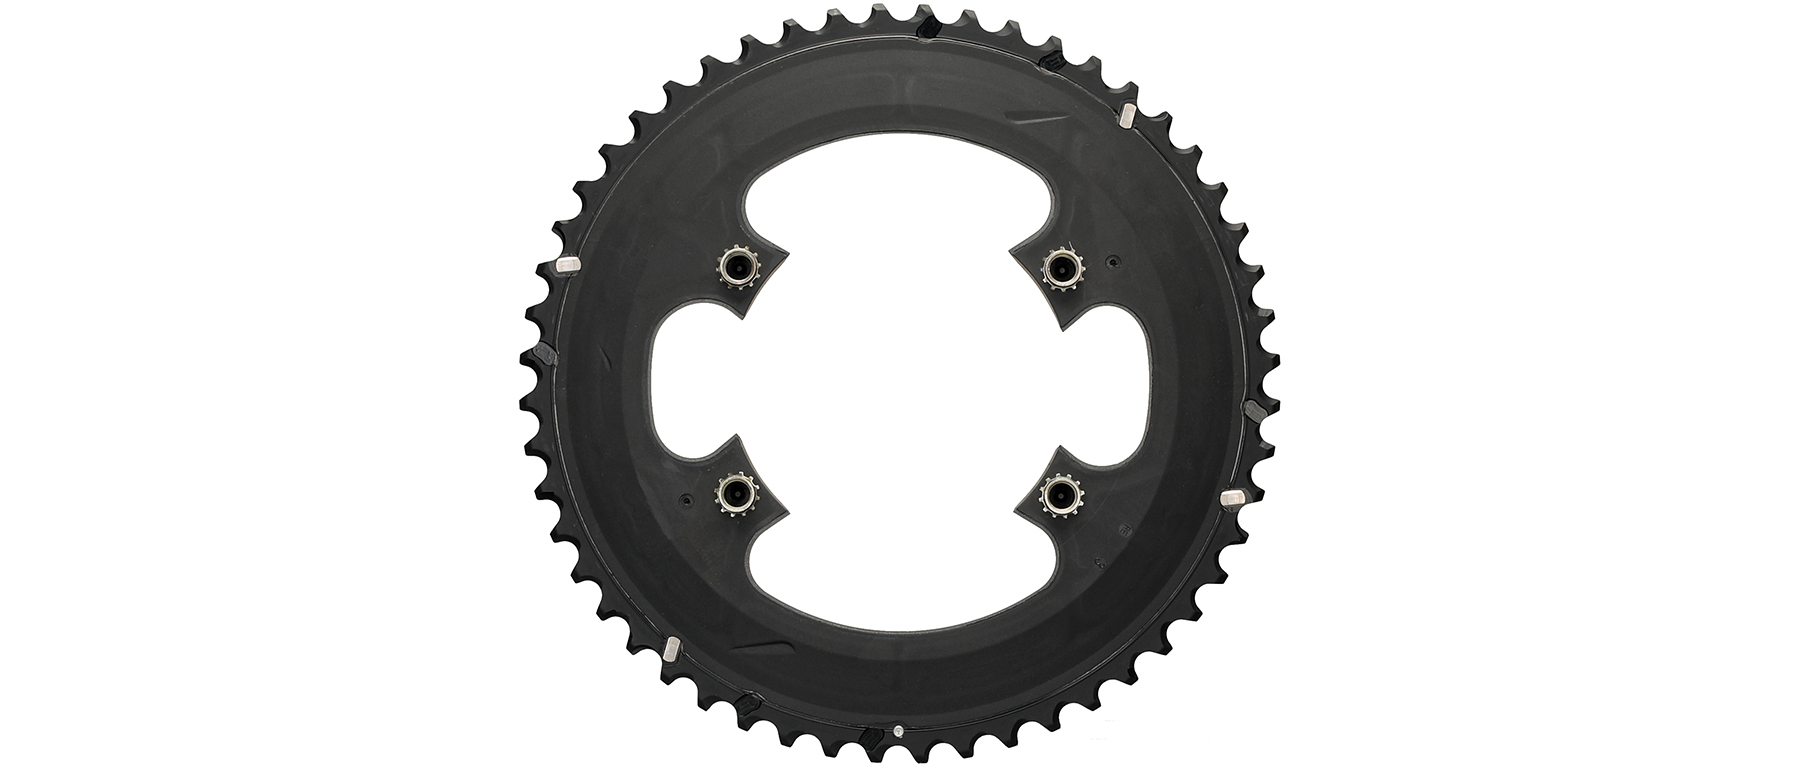 Shimano Ultegra FC-6800 Outer Chainring